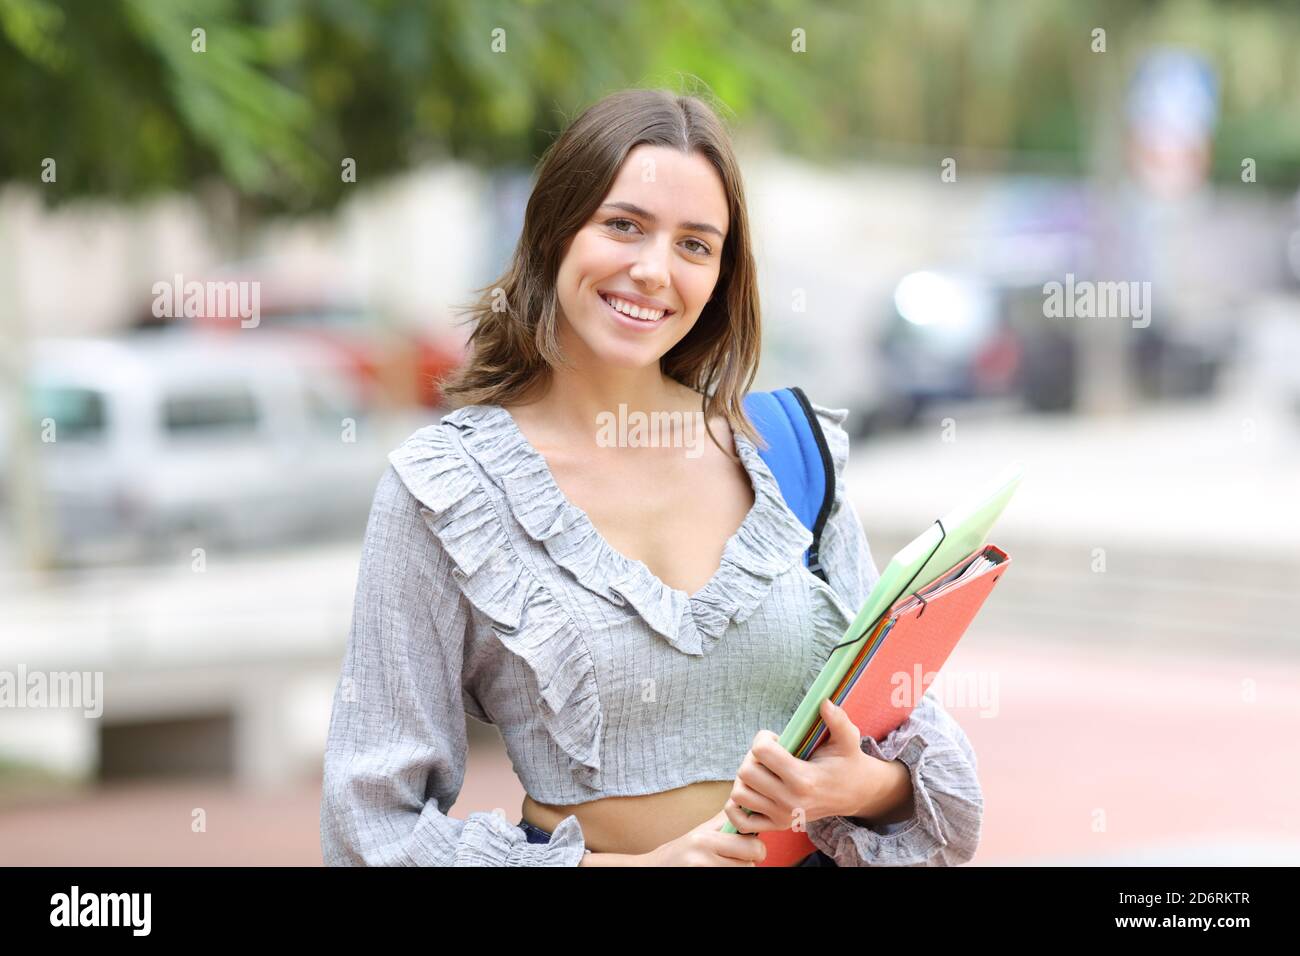 Happy student posing looking at camera with folders standing in the street Stock Photo